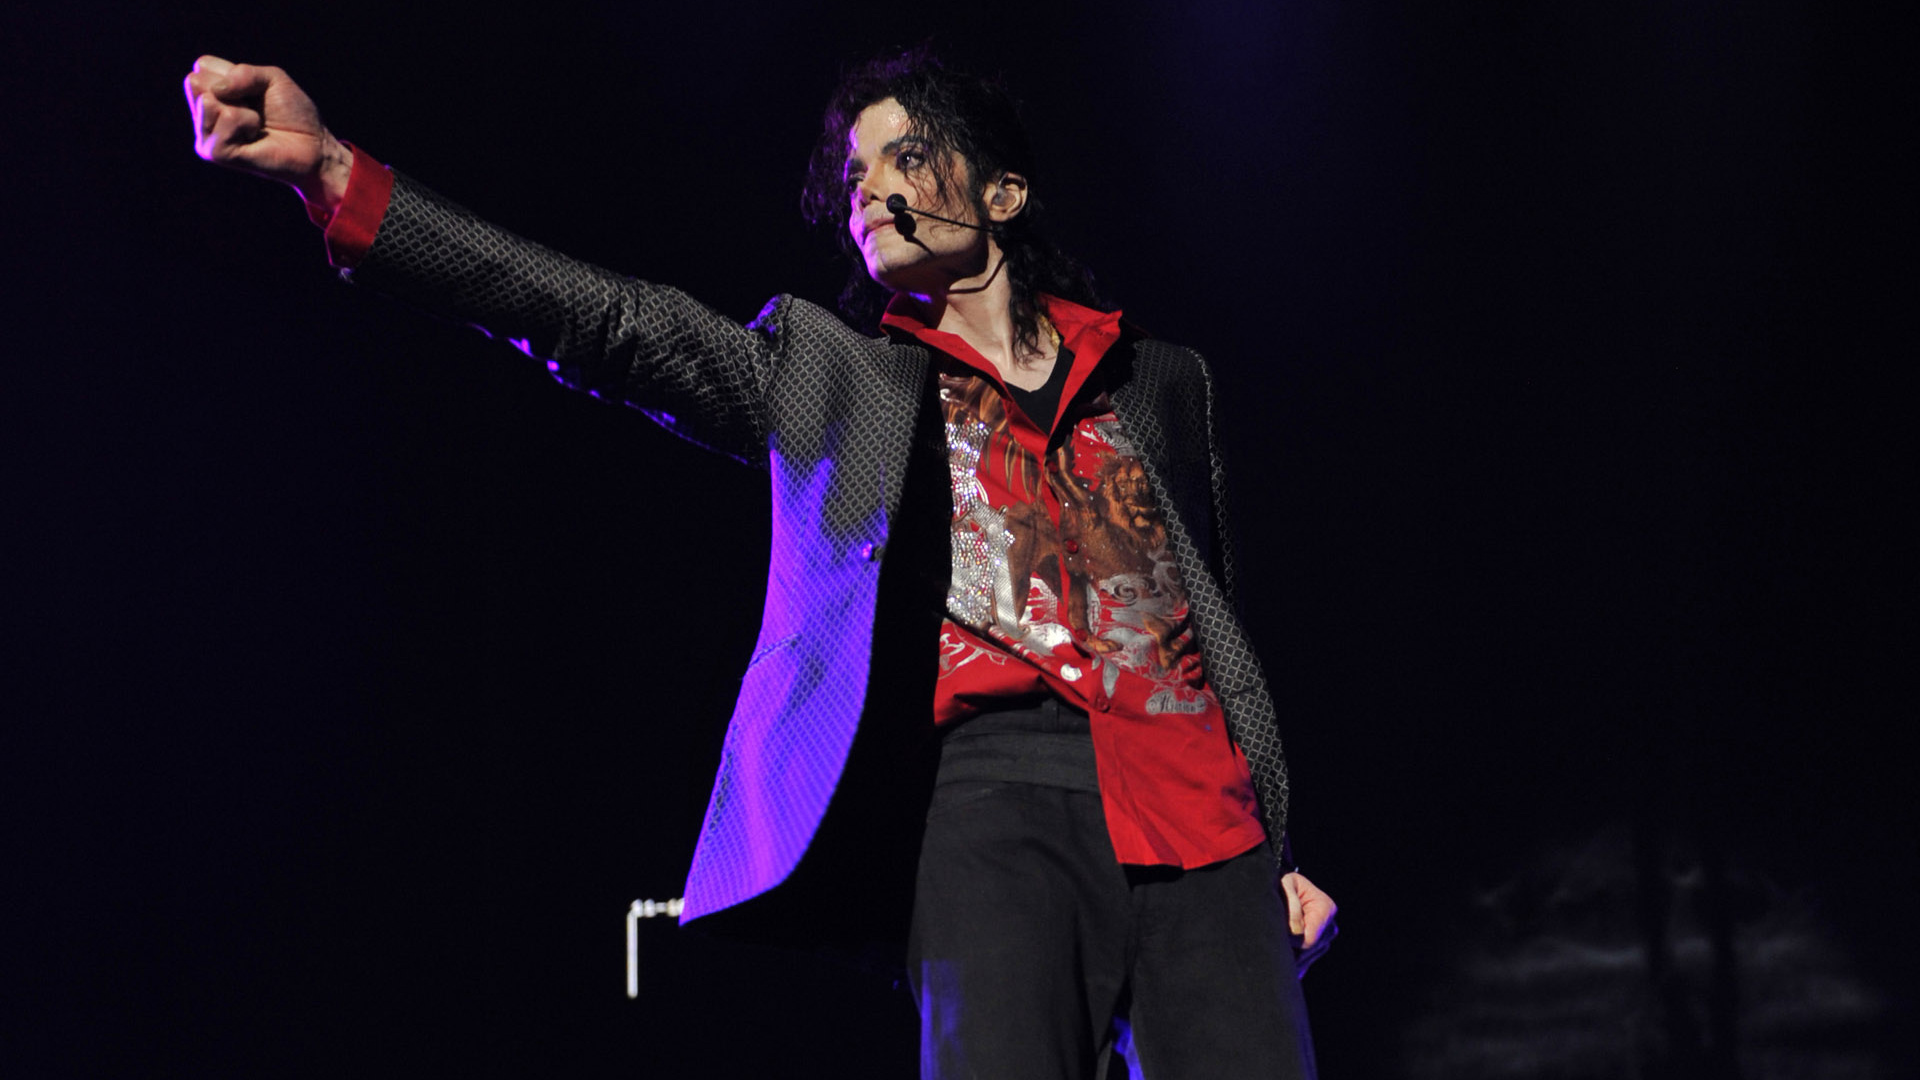 Michael Jackson, Performance, Entertainment, Performing Arts, Event. Wallpaper in 1920x1080 Resolution